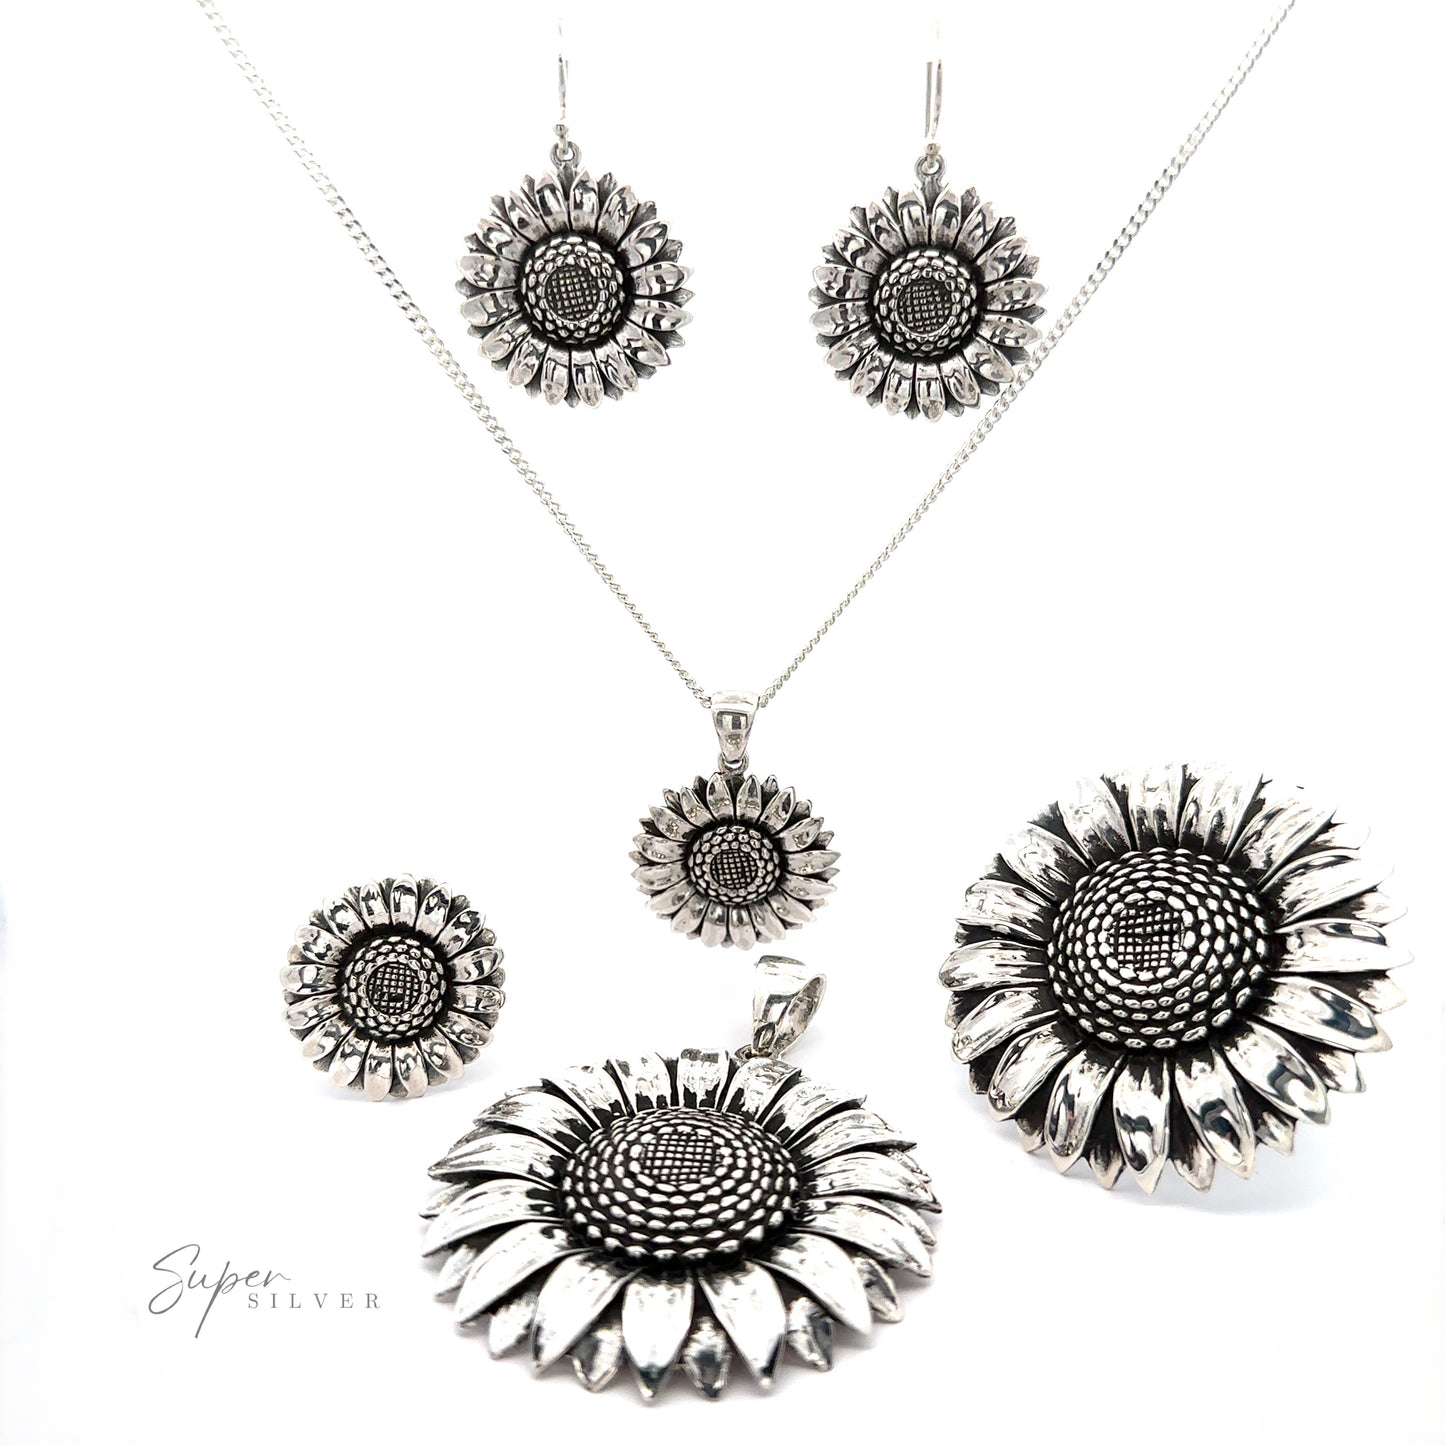 
                  
                    Silver jewelry set including earrings, necklaces, and a brooch with Silver Sunflower Pendants on a white background.
                  
                